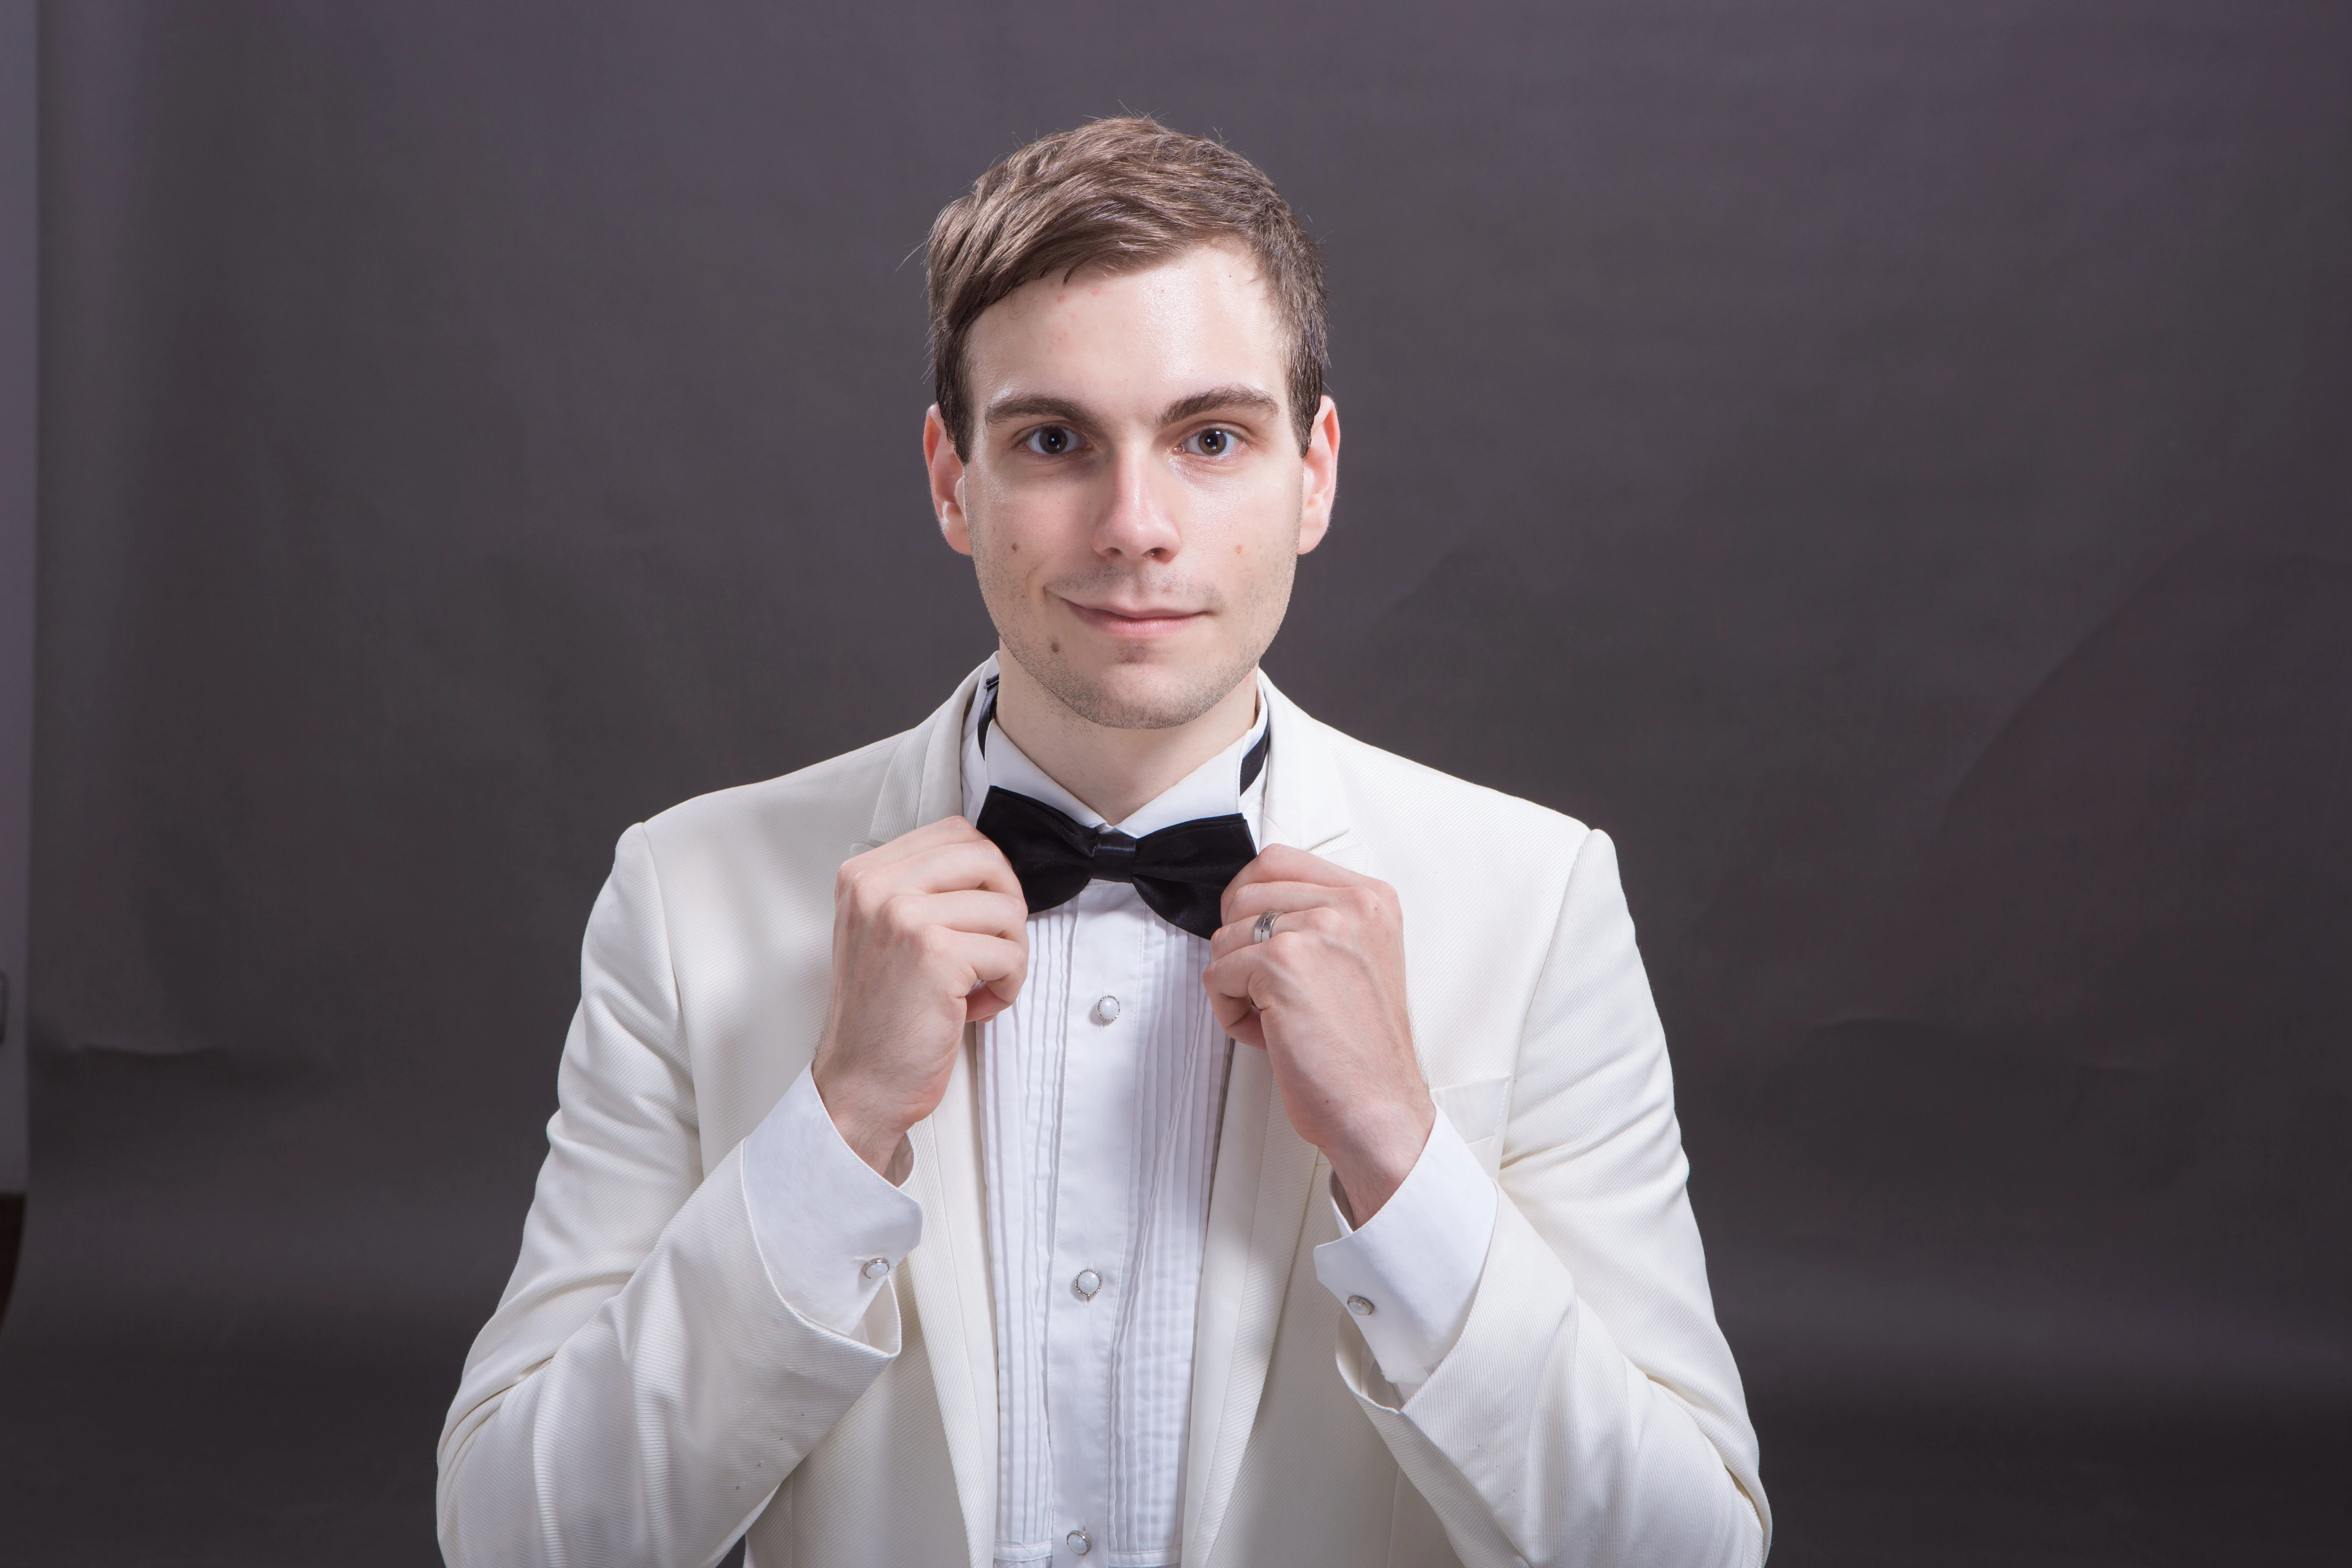 Spencer Carver wearing a white tuxedo and black bowtie